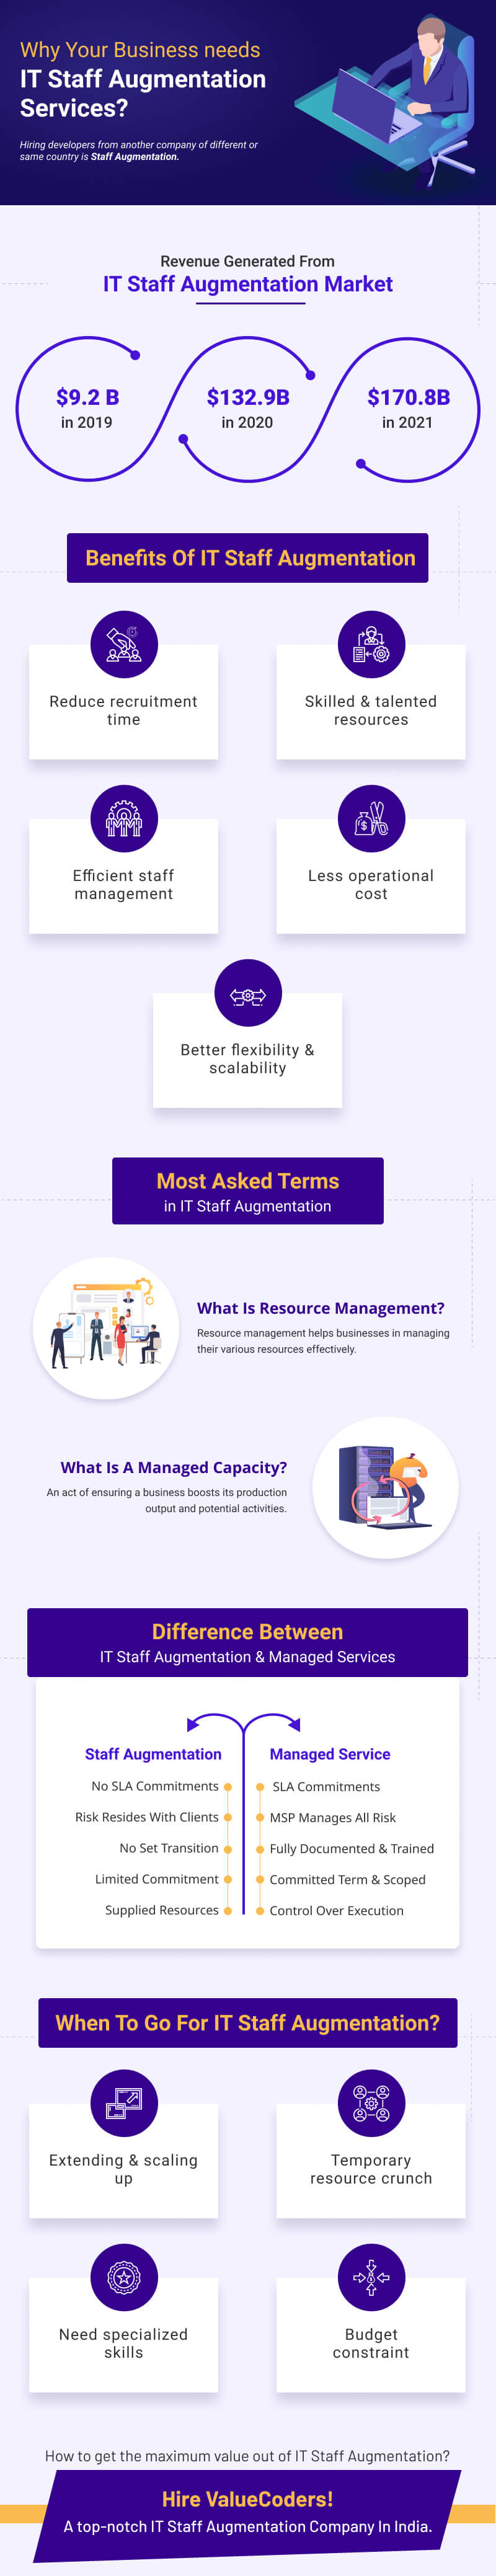 Why Your Business needs IT Staff Augmentation Services? [Infographic]